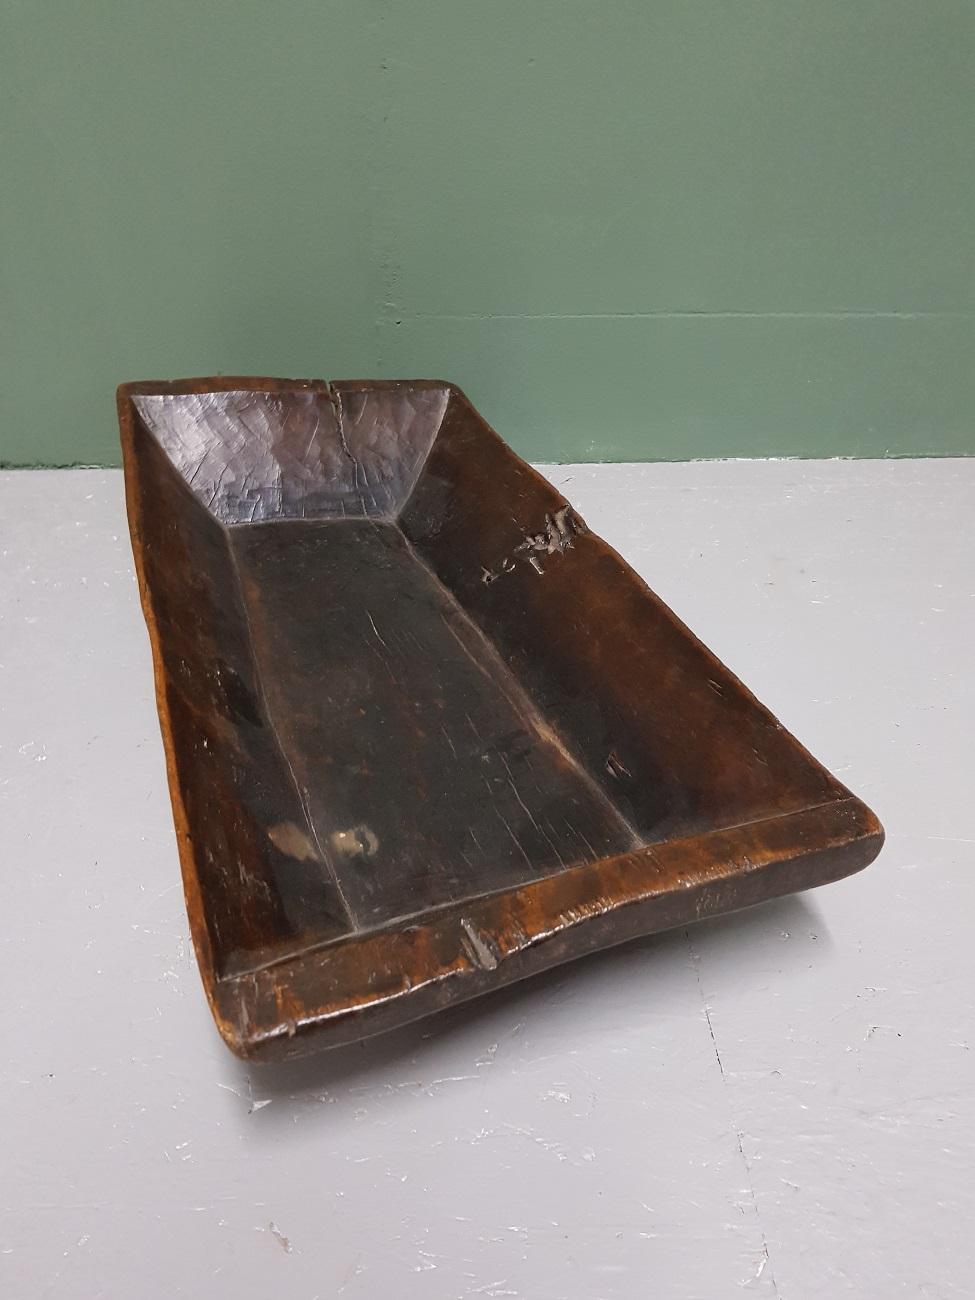 Old hand-cut wooden trough from the 19th century with a beautiful patina.

The measurements are,
Depth 30 cm/ 11.8 inch.
Width 62 cm/ 24.4 inch.
Height 12 cm/ 4.7 inch.
  